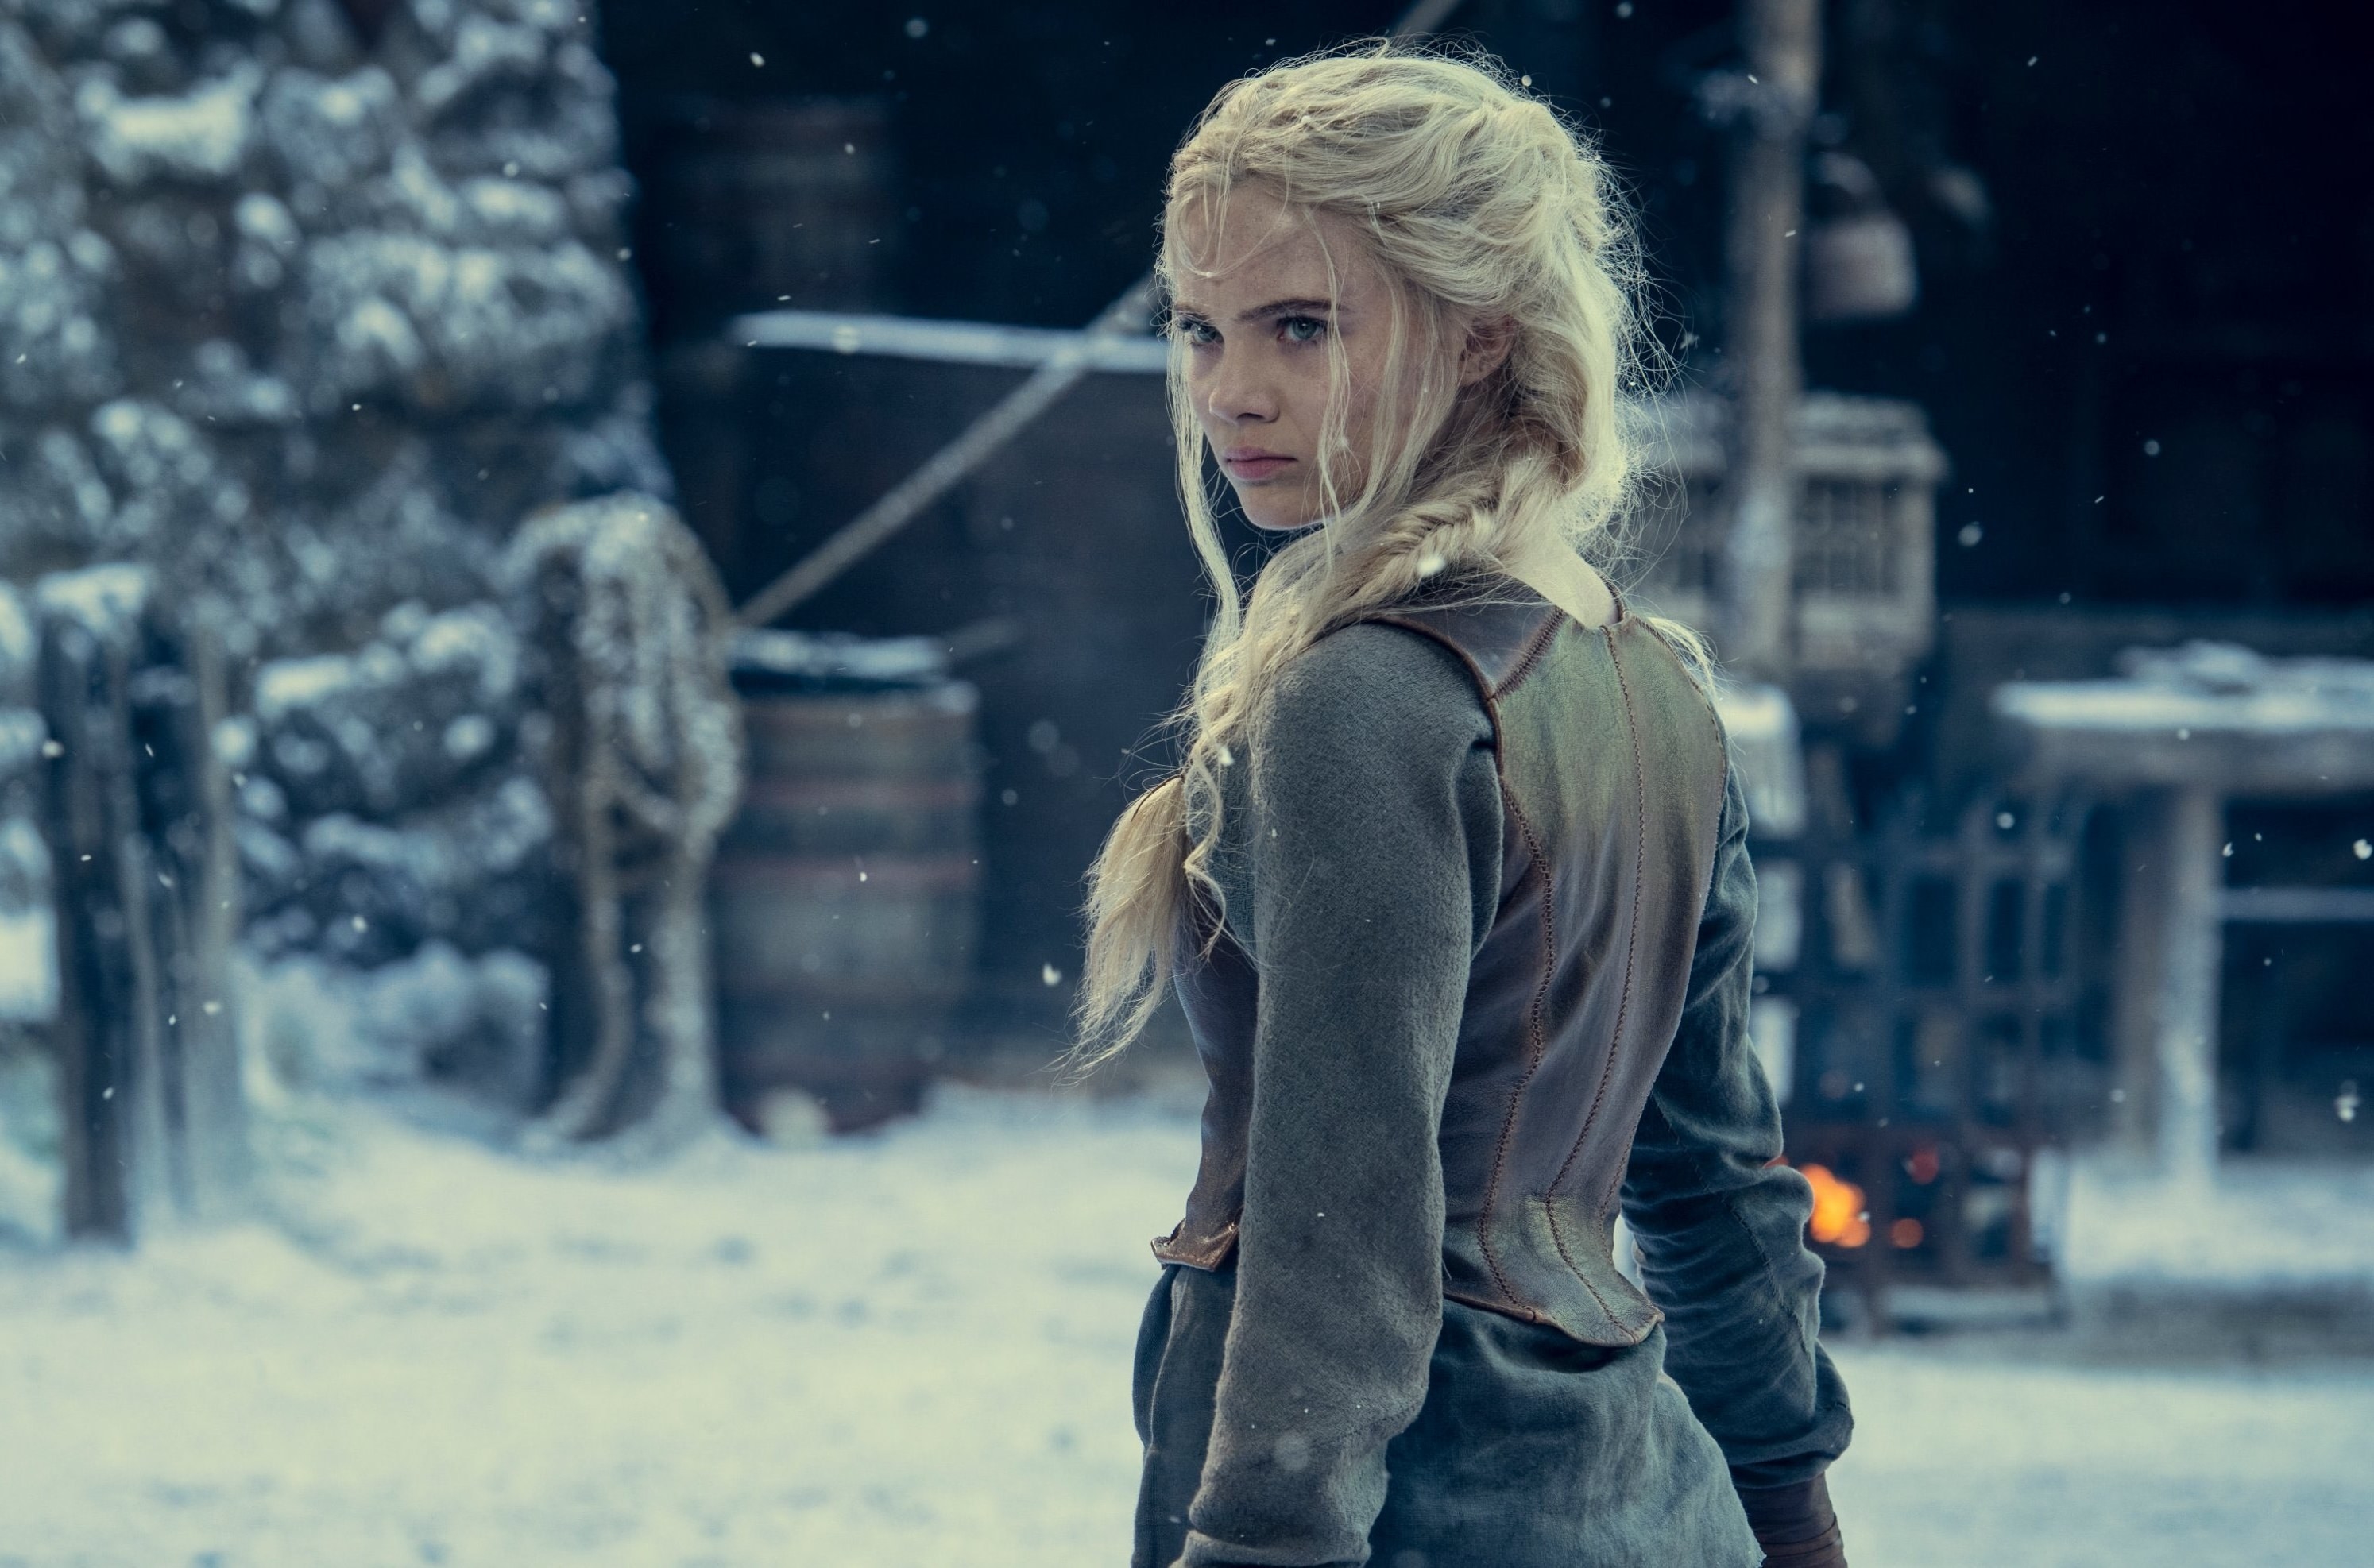 ciri from the show witcher looking back while standing outside in the snow